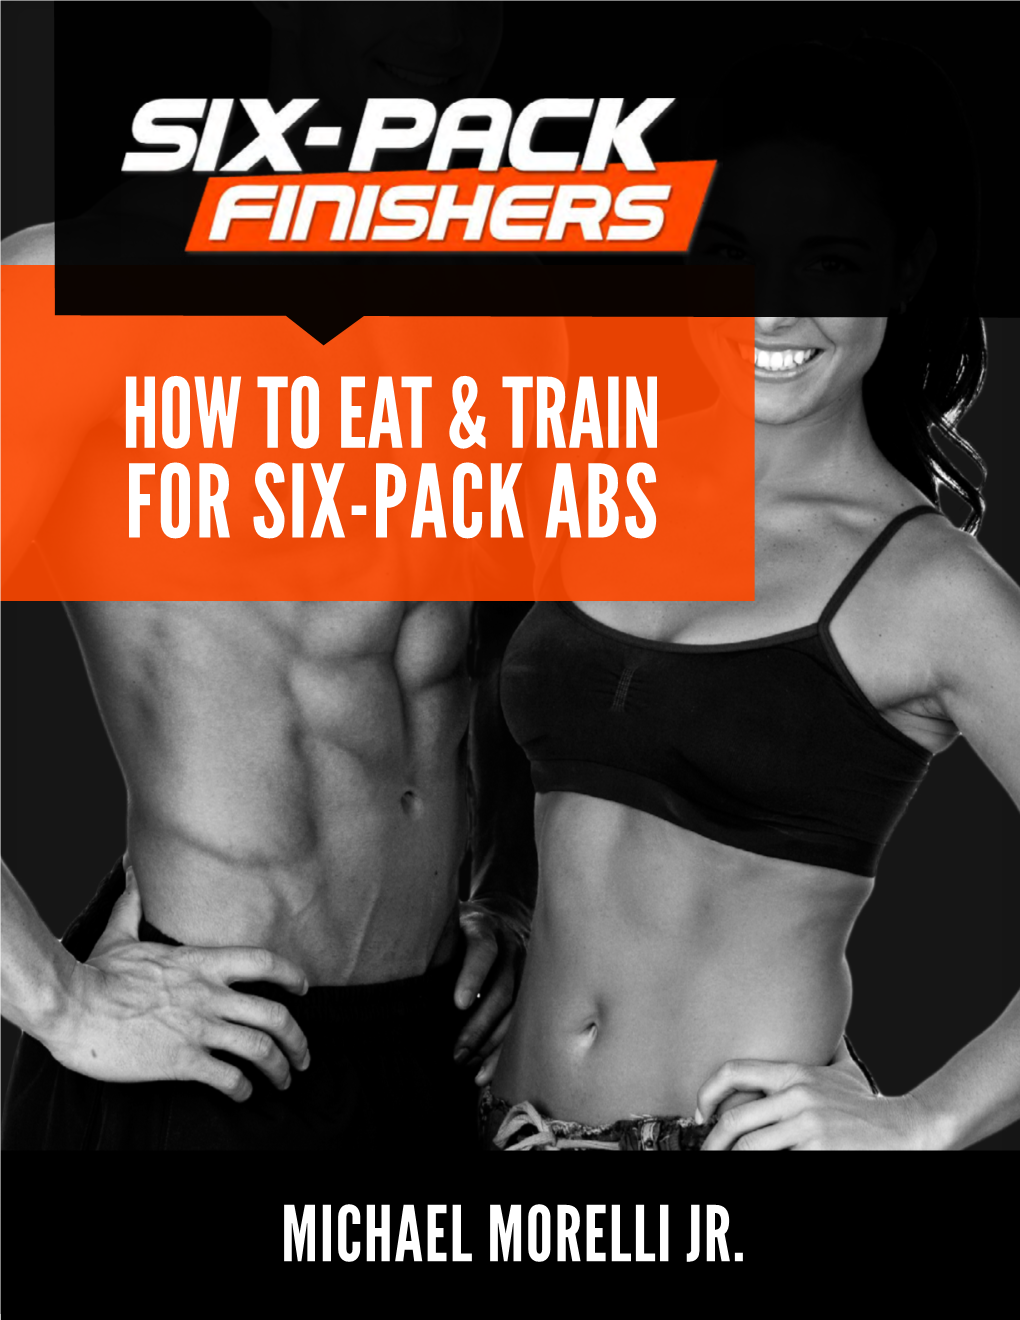 How to Eat & Train for Six-Pack